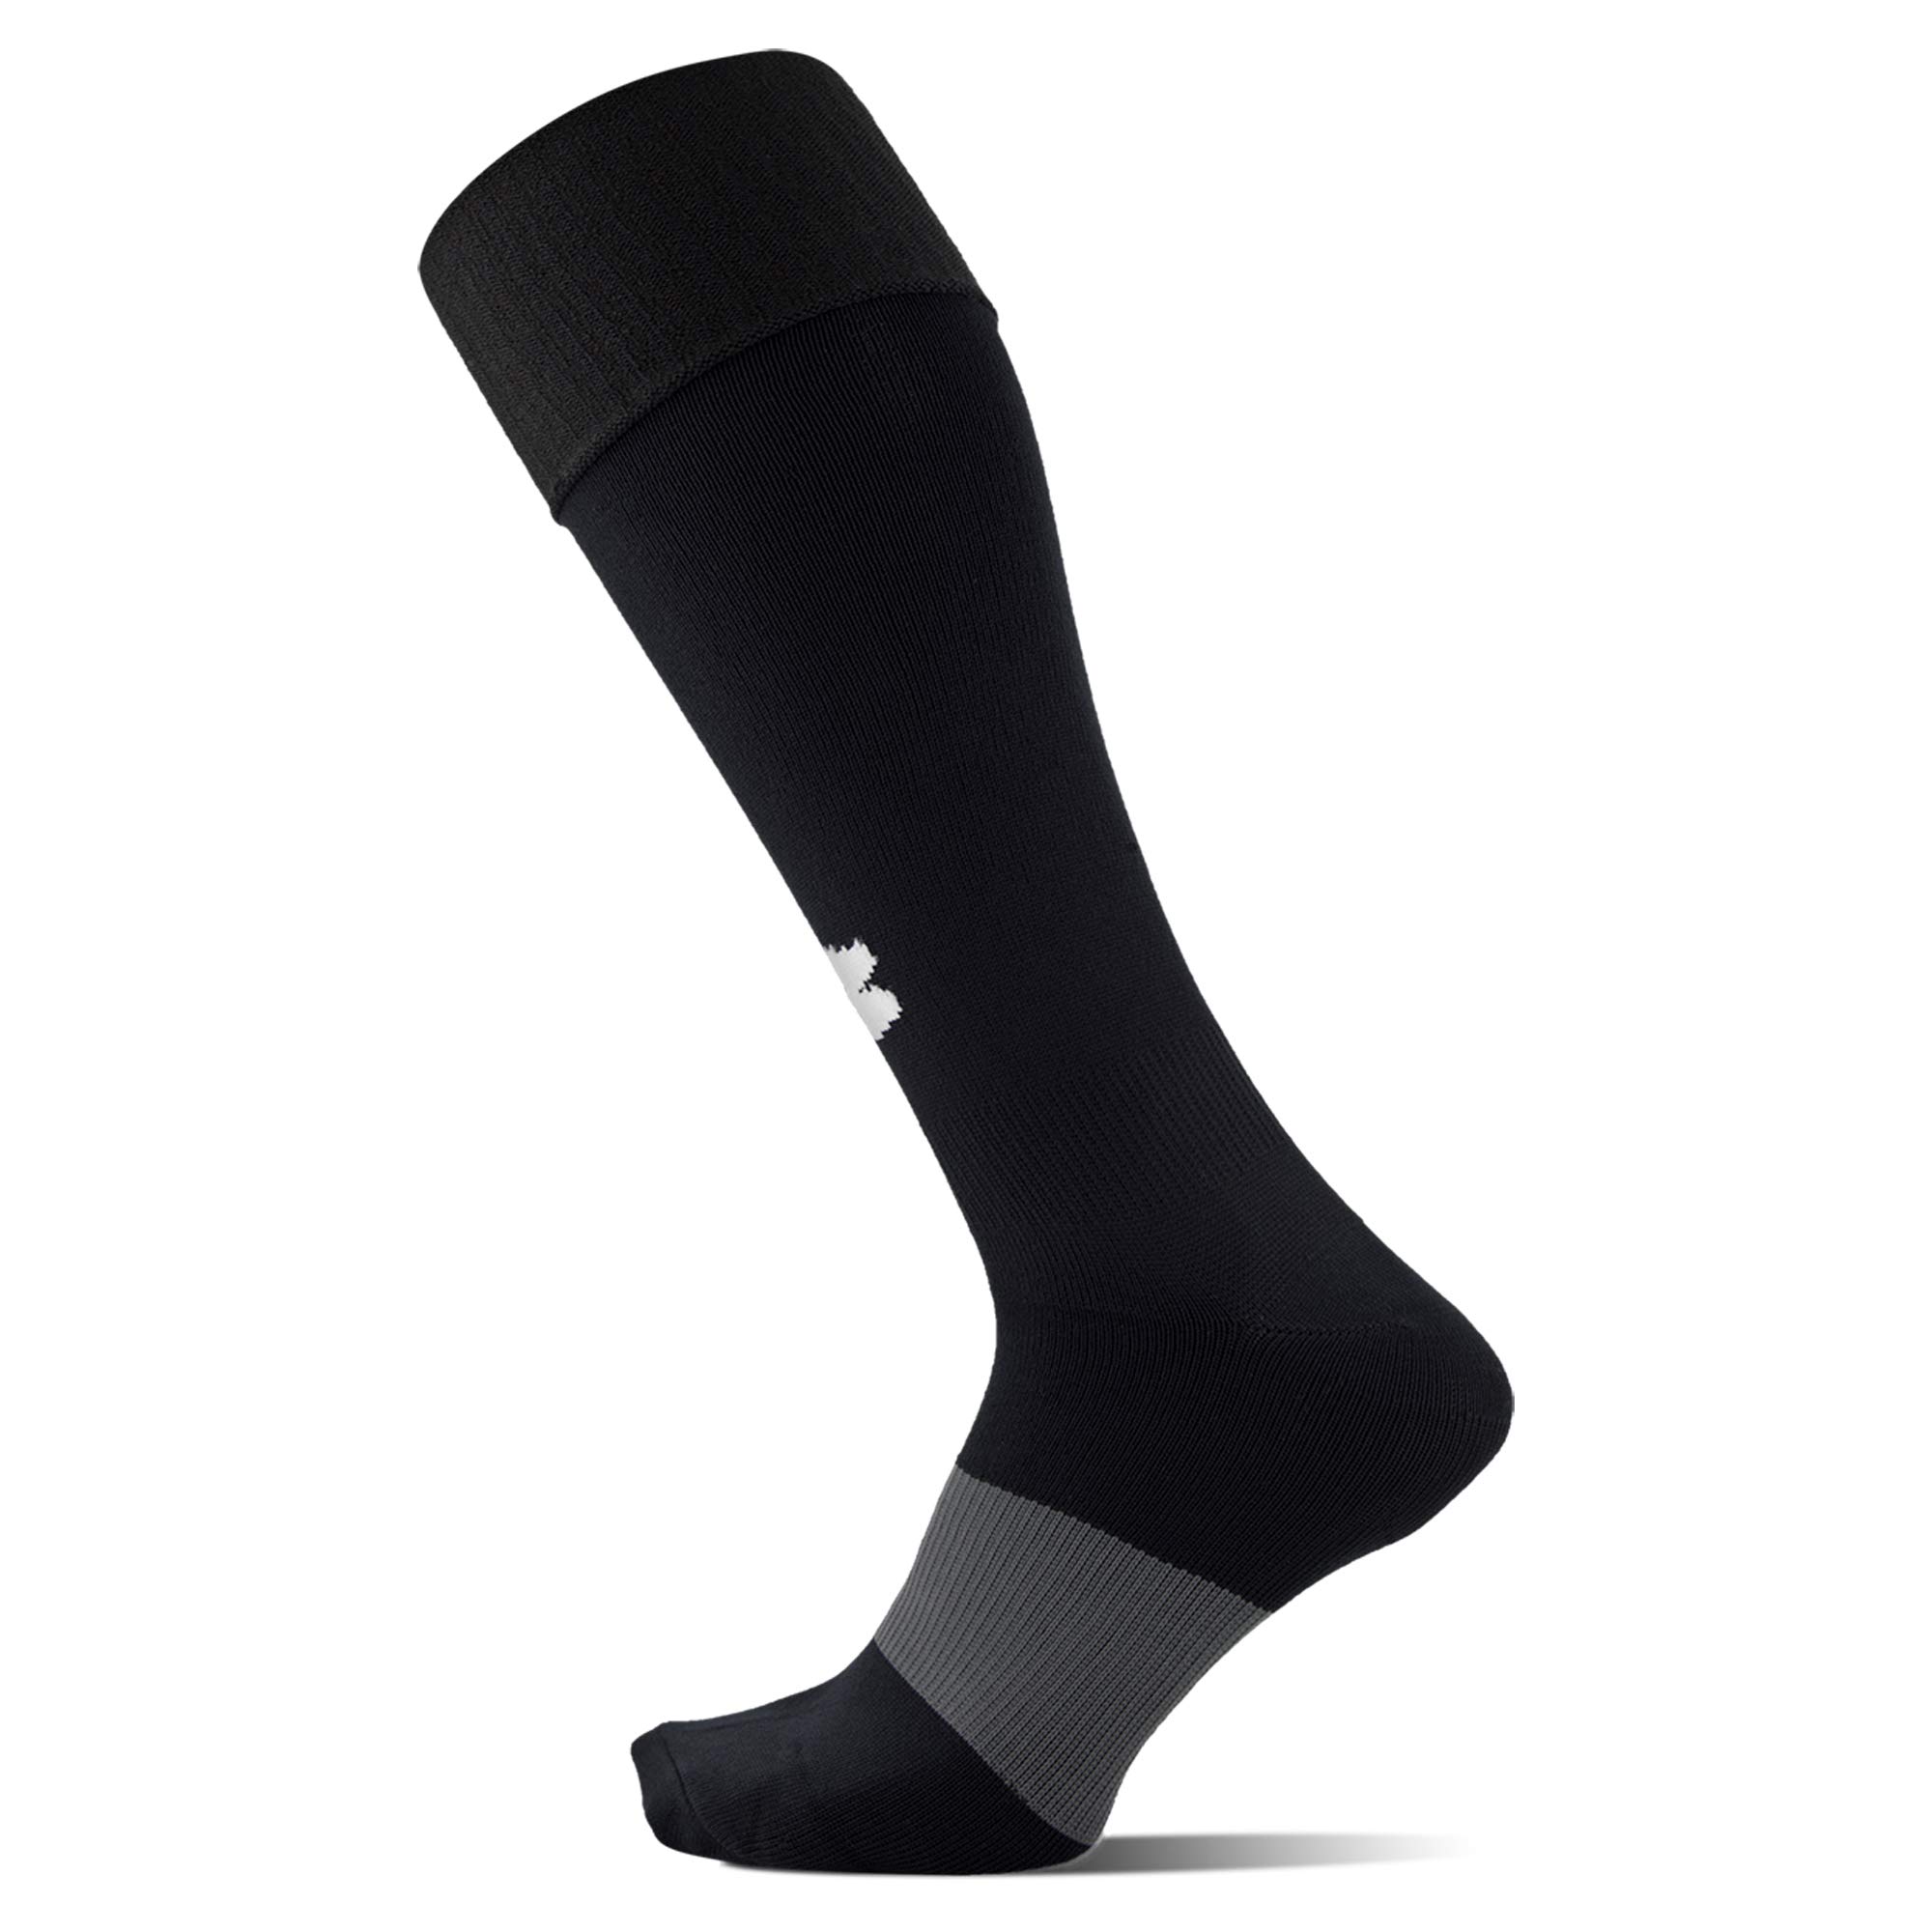 Under Armour womens Soccer Over the Calf Sock, 1-pair